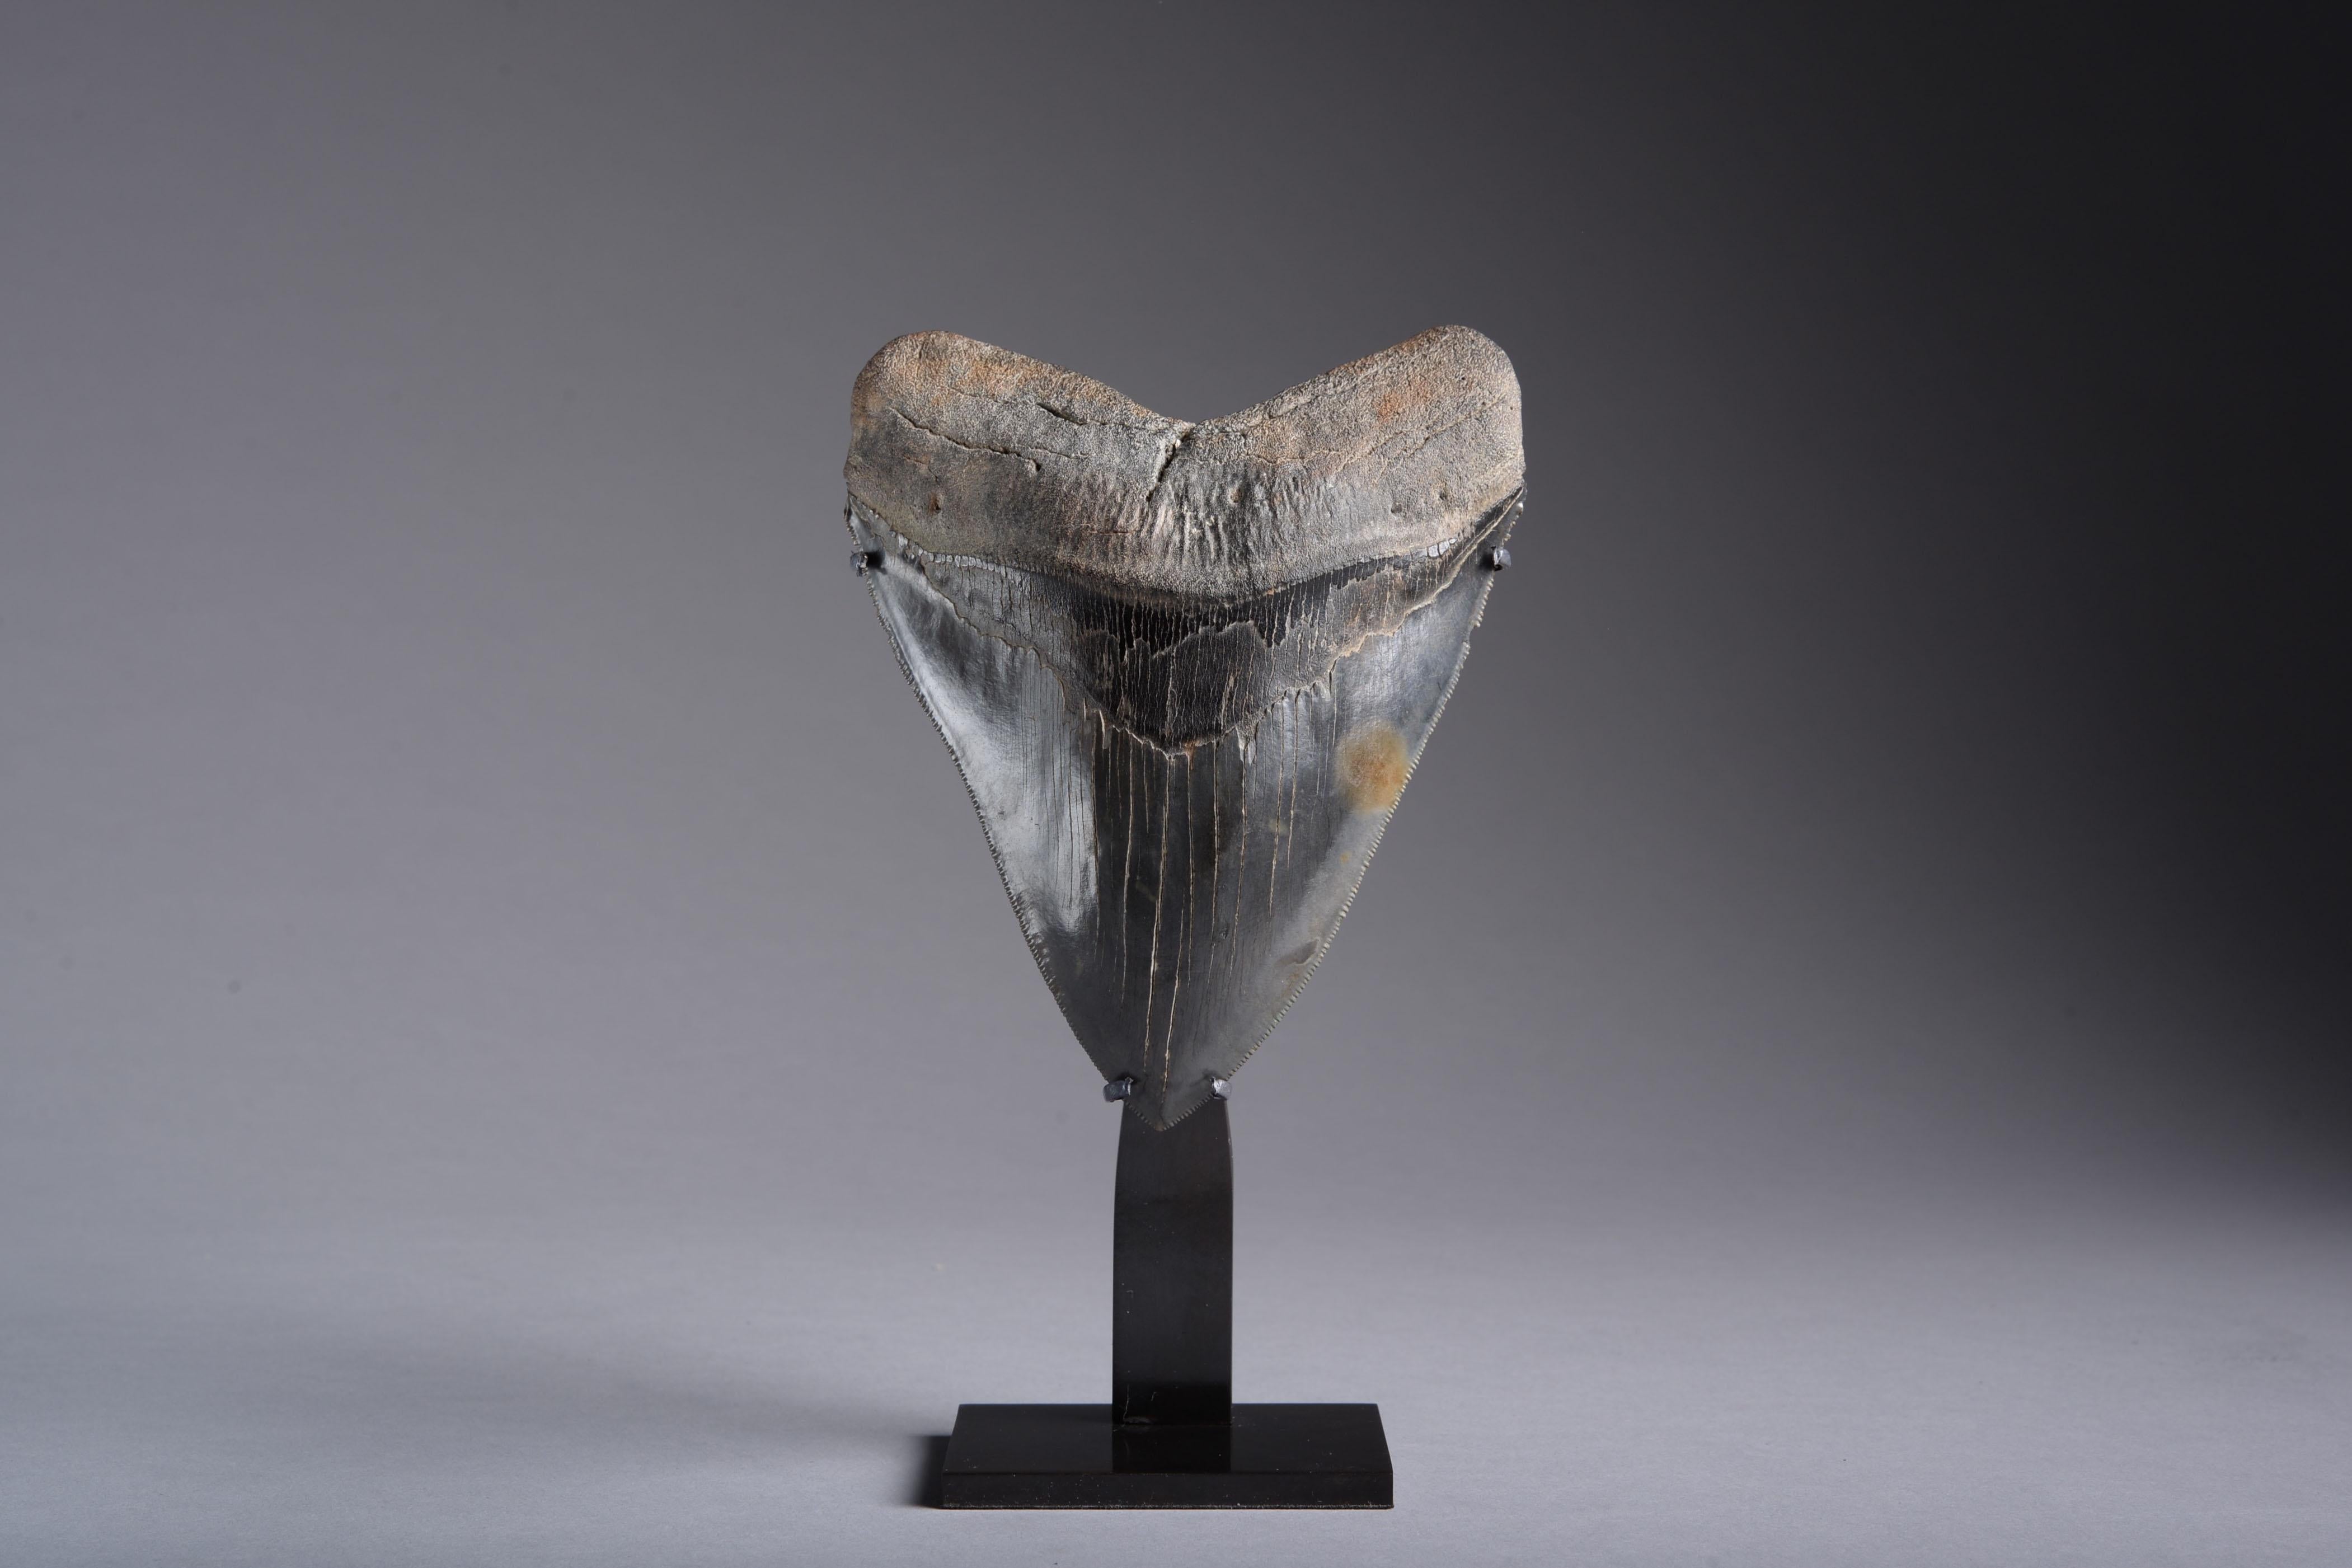 A huge, perfectly preserved Megalodon (Carcharocles megalodon) shark tooth, dating to 25 – 2 million years before the present day.

It's hard to comprehend that this enormous serrated tooth once belonged to a living creature. Yet this beautiful